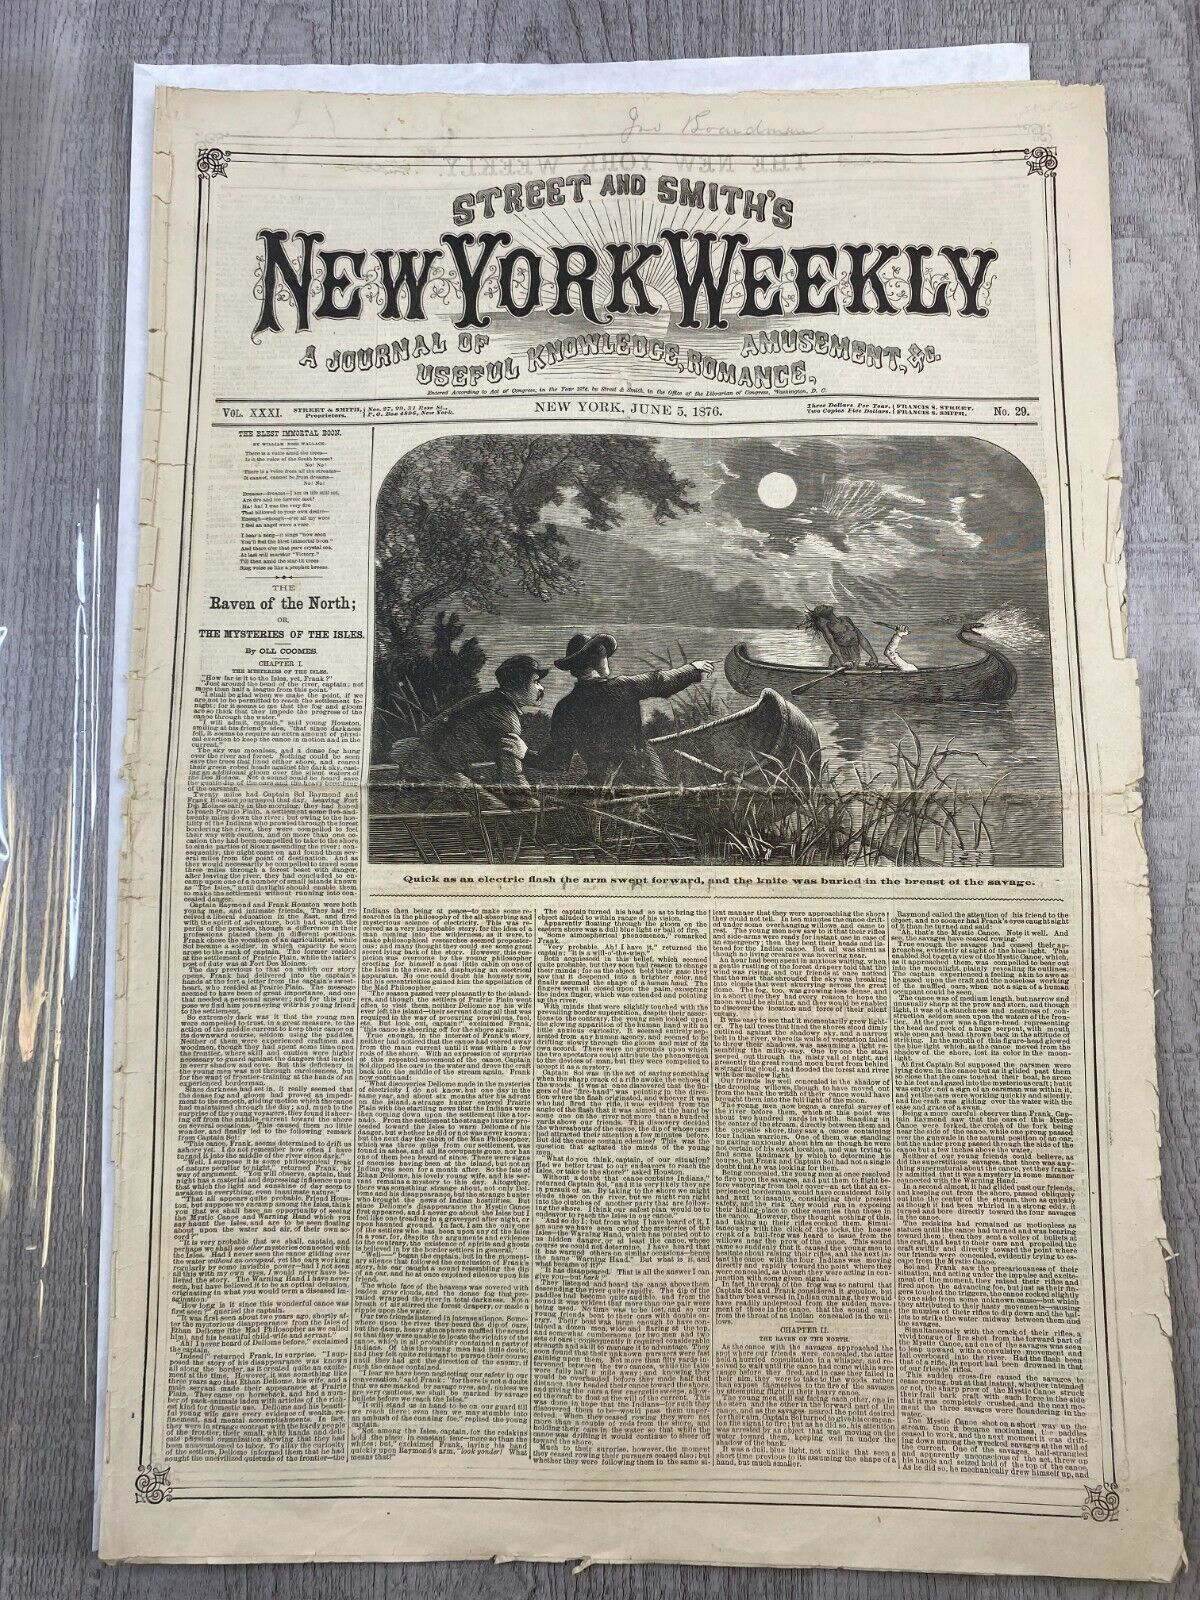 Street and Smith's NEW YORK WEEKLY Vintage Newspaper June 5, 1876 No. 29 Stories